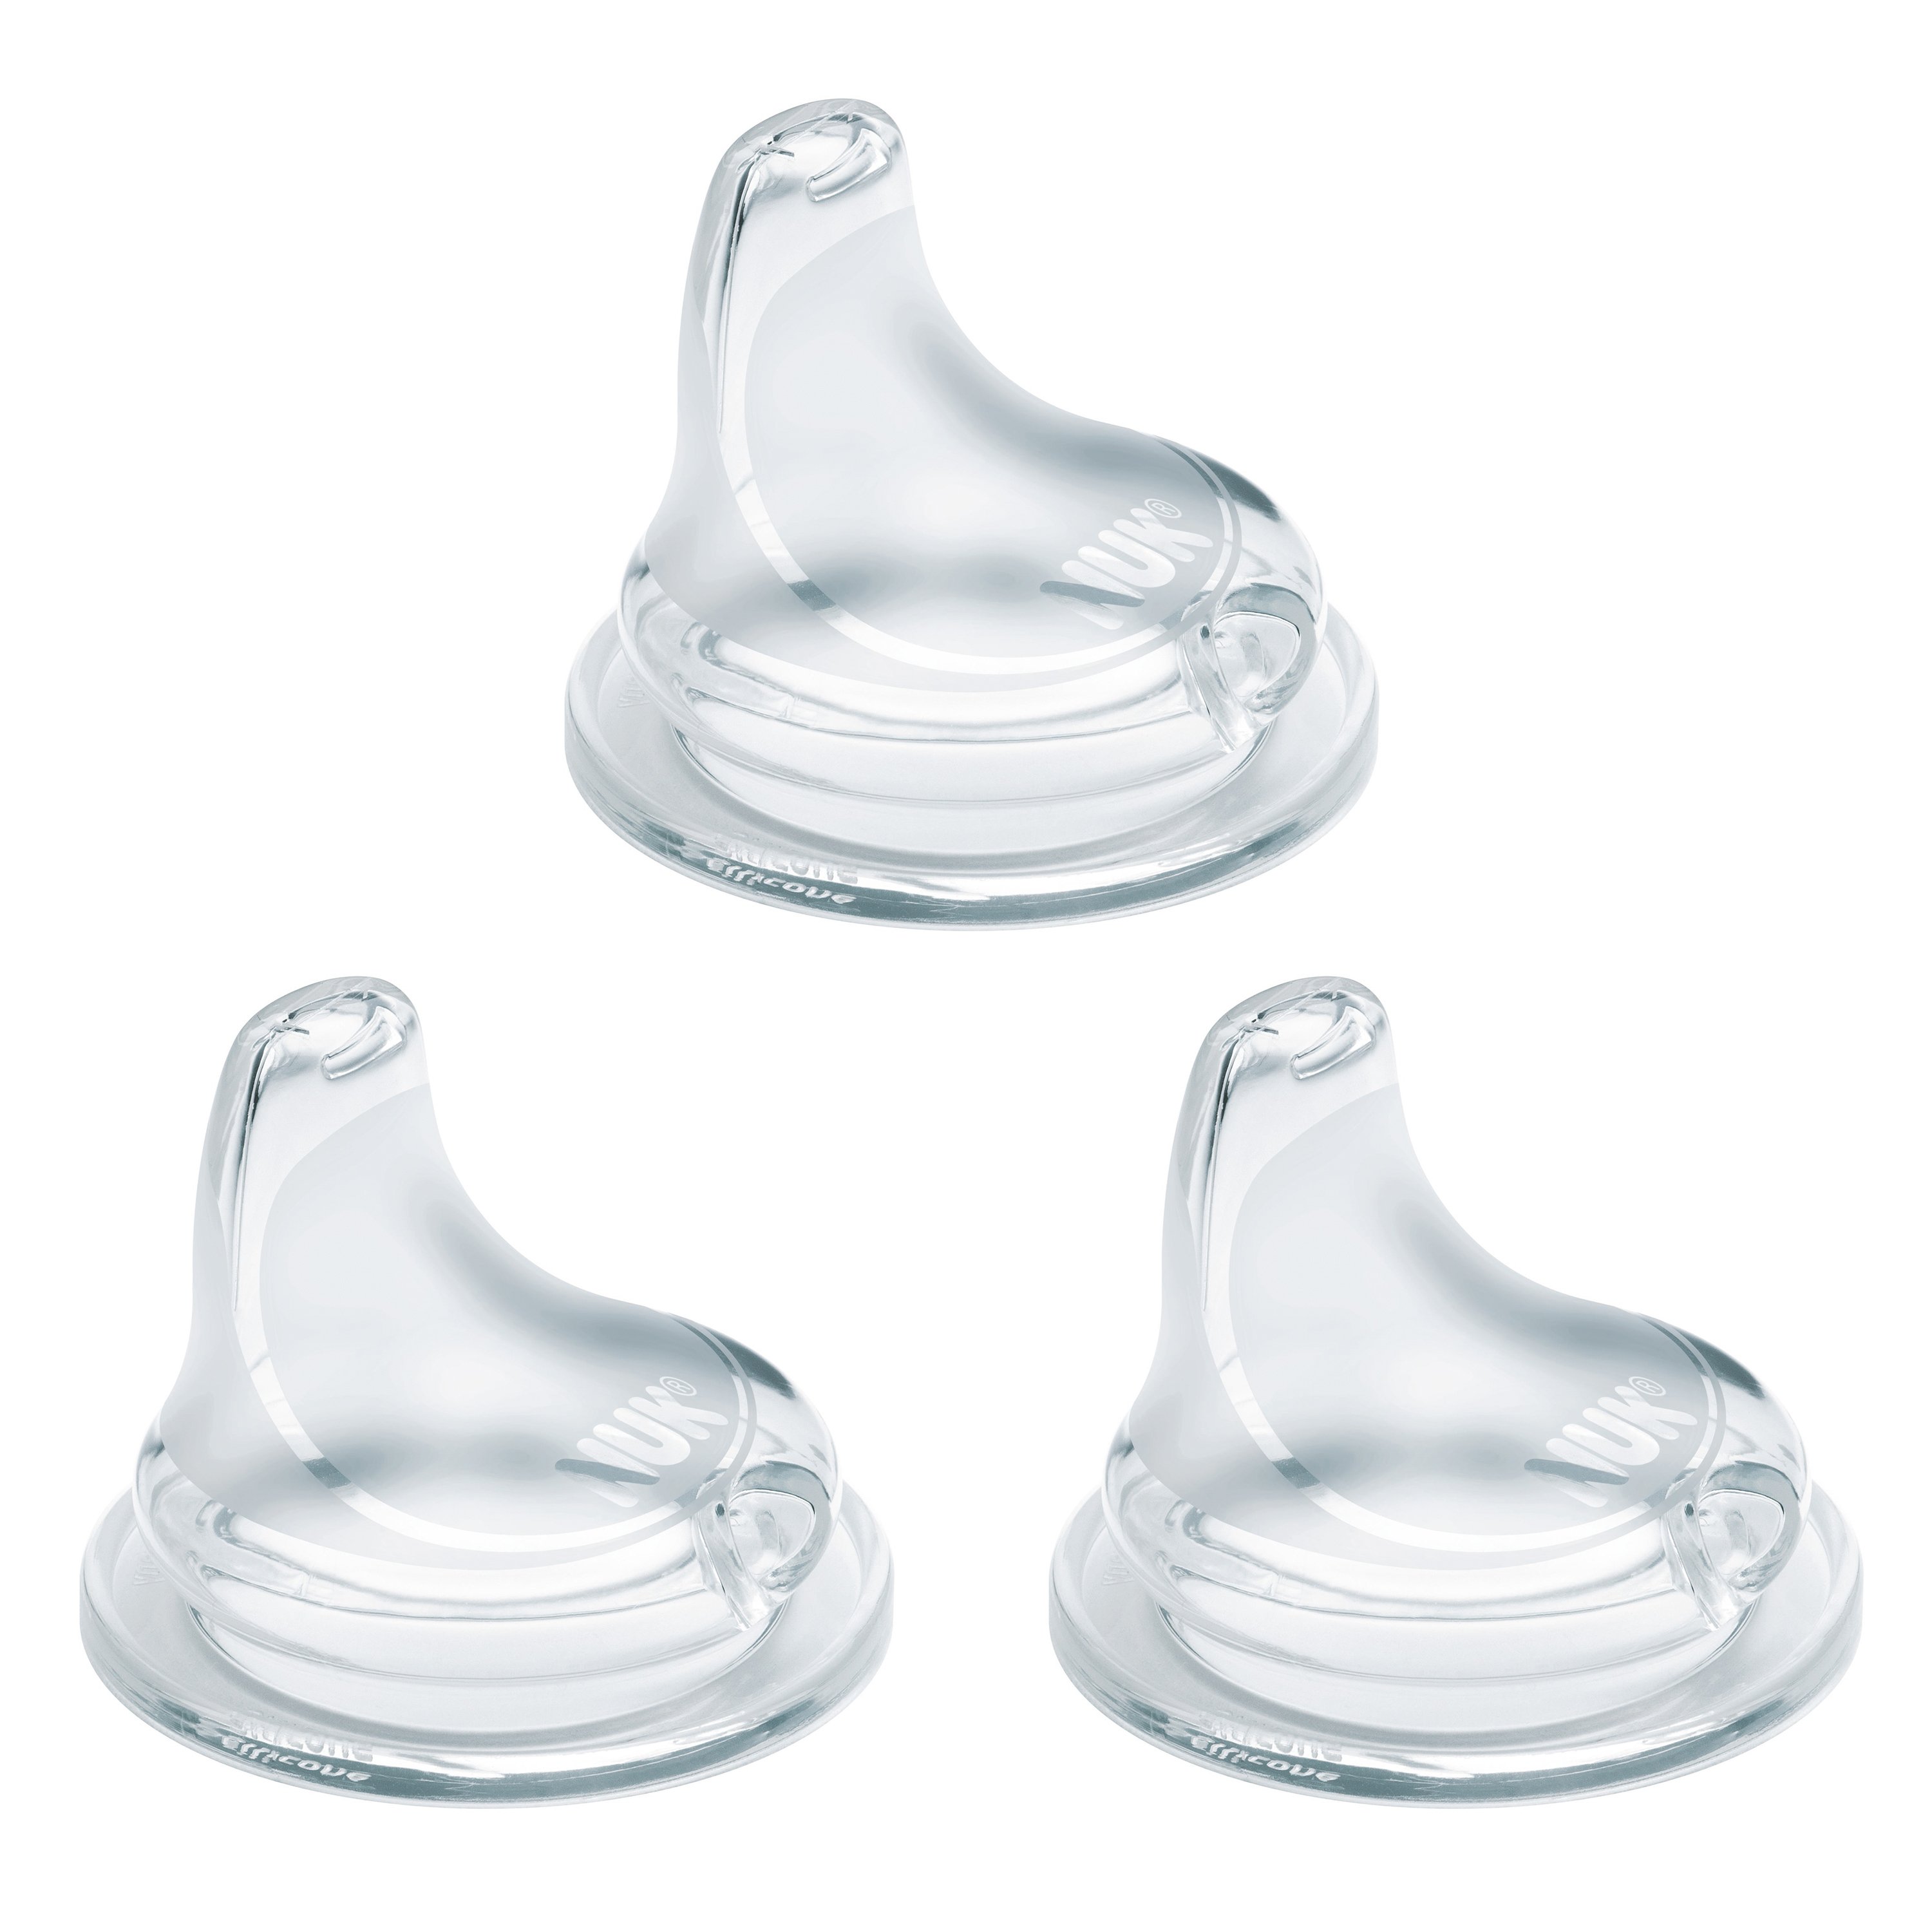 NUK Replacement Silicone Spout, Clear, Pack of 3 | NUK